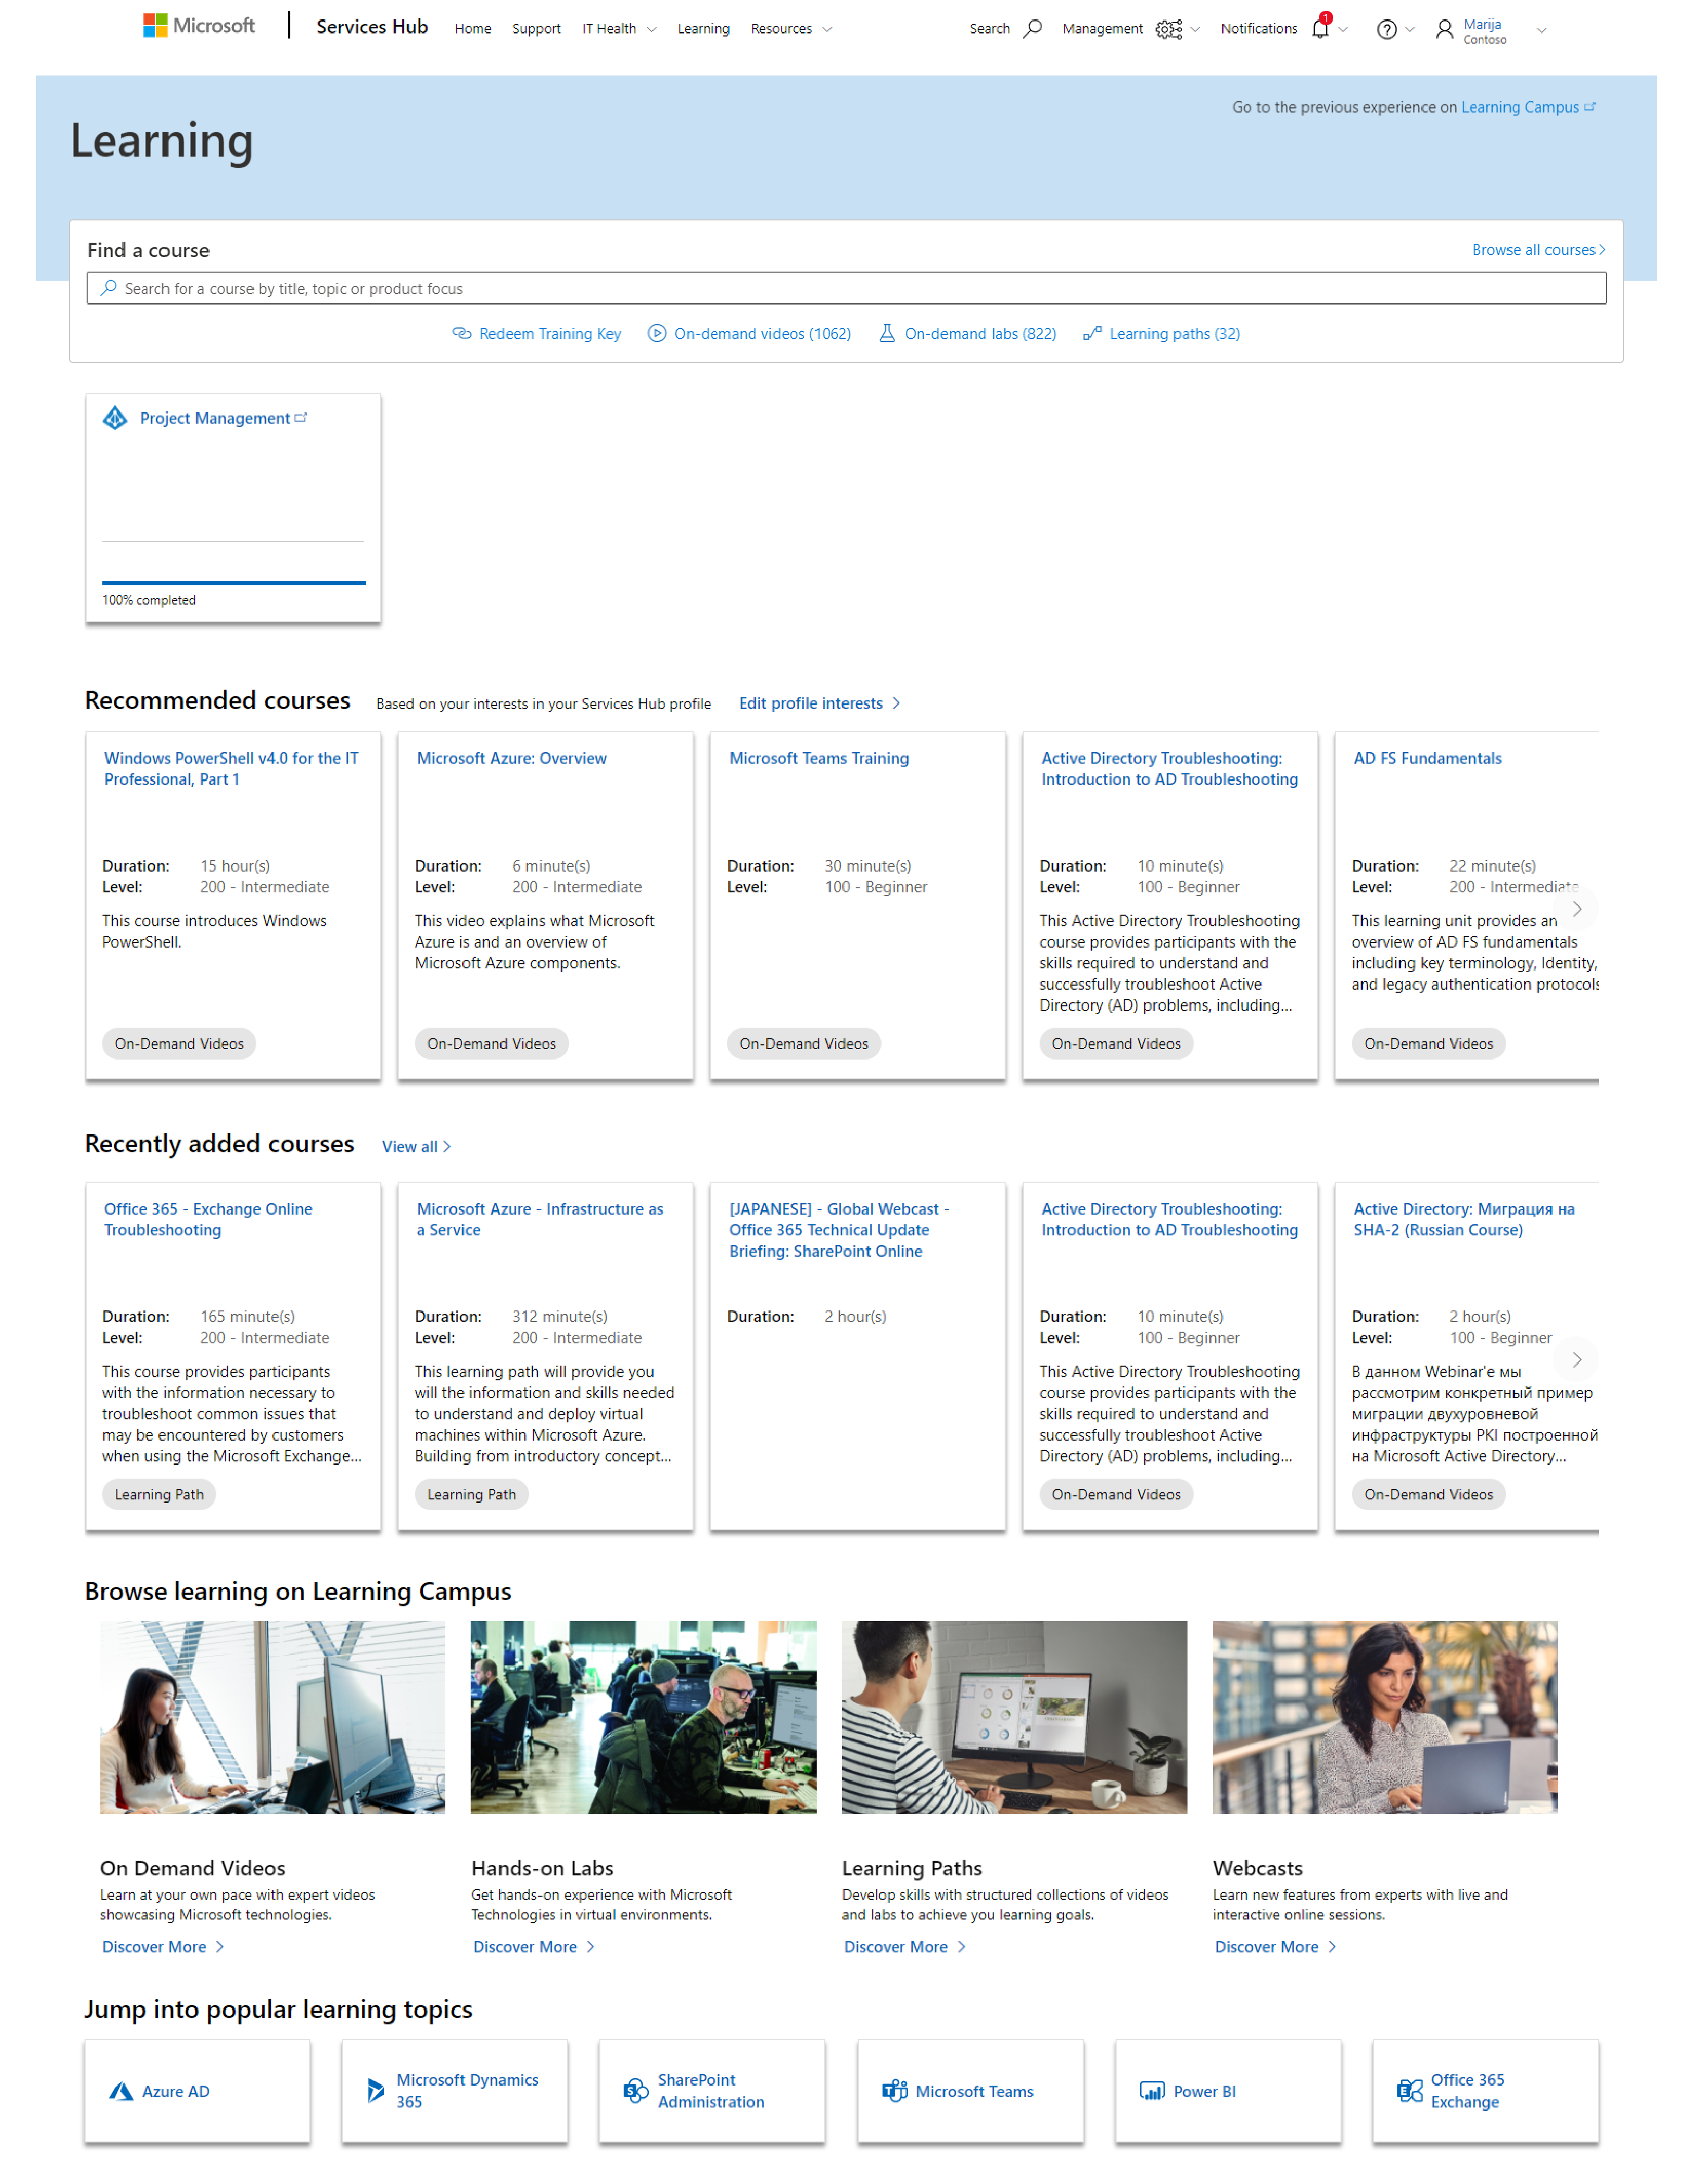 Learning Landing Page with My Learning, Recommended Courses, Recently Added Courses, Browse learning on Learning Campus and Jump into Popular Topics showing